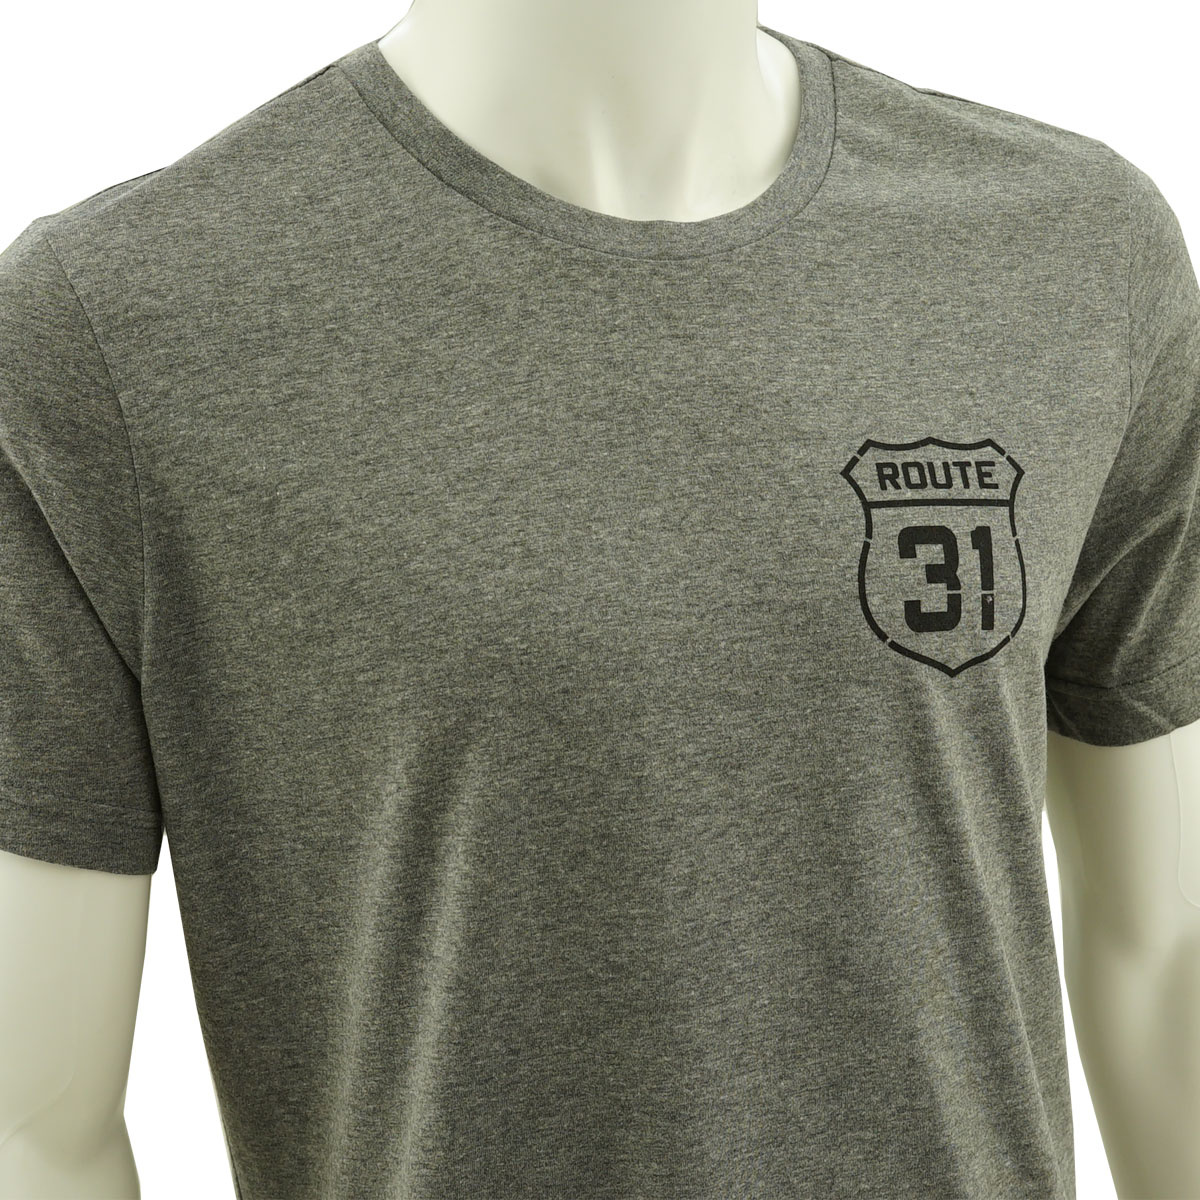 Topfanz T-shirt grey Route 31 - KV Oostende